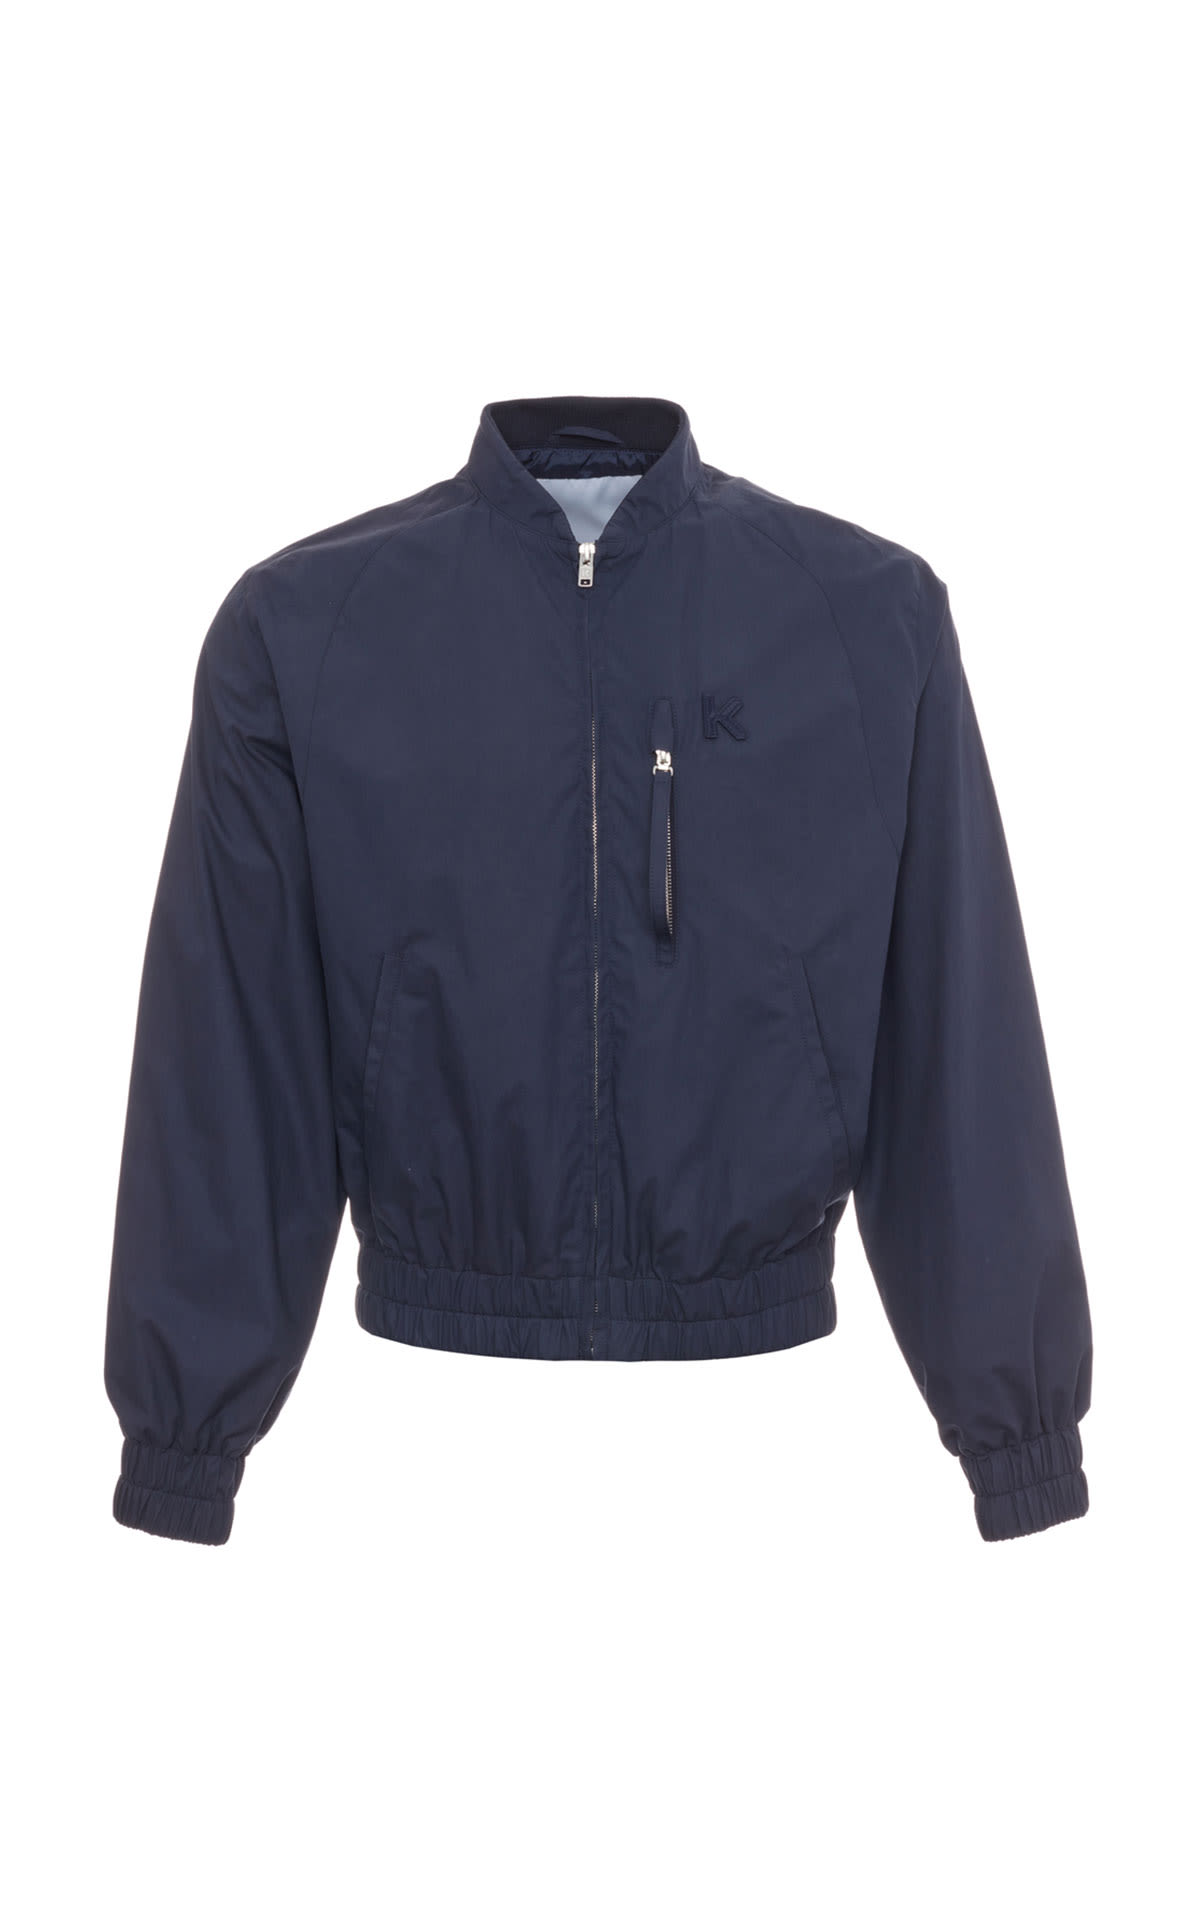 Kenzo Light weight jacket from Bicester Village